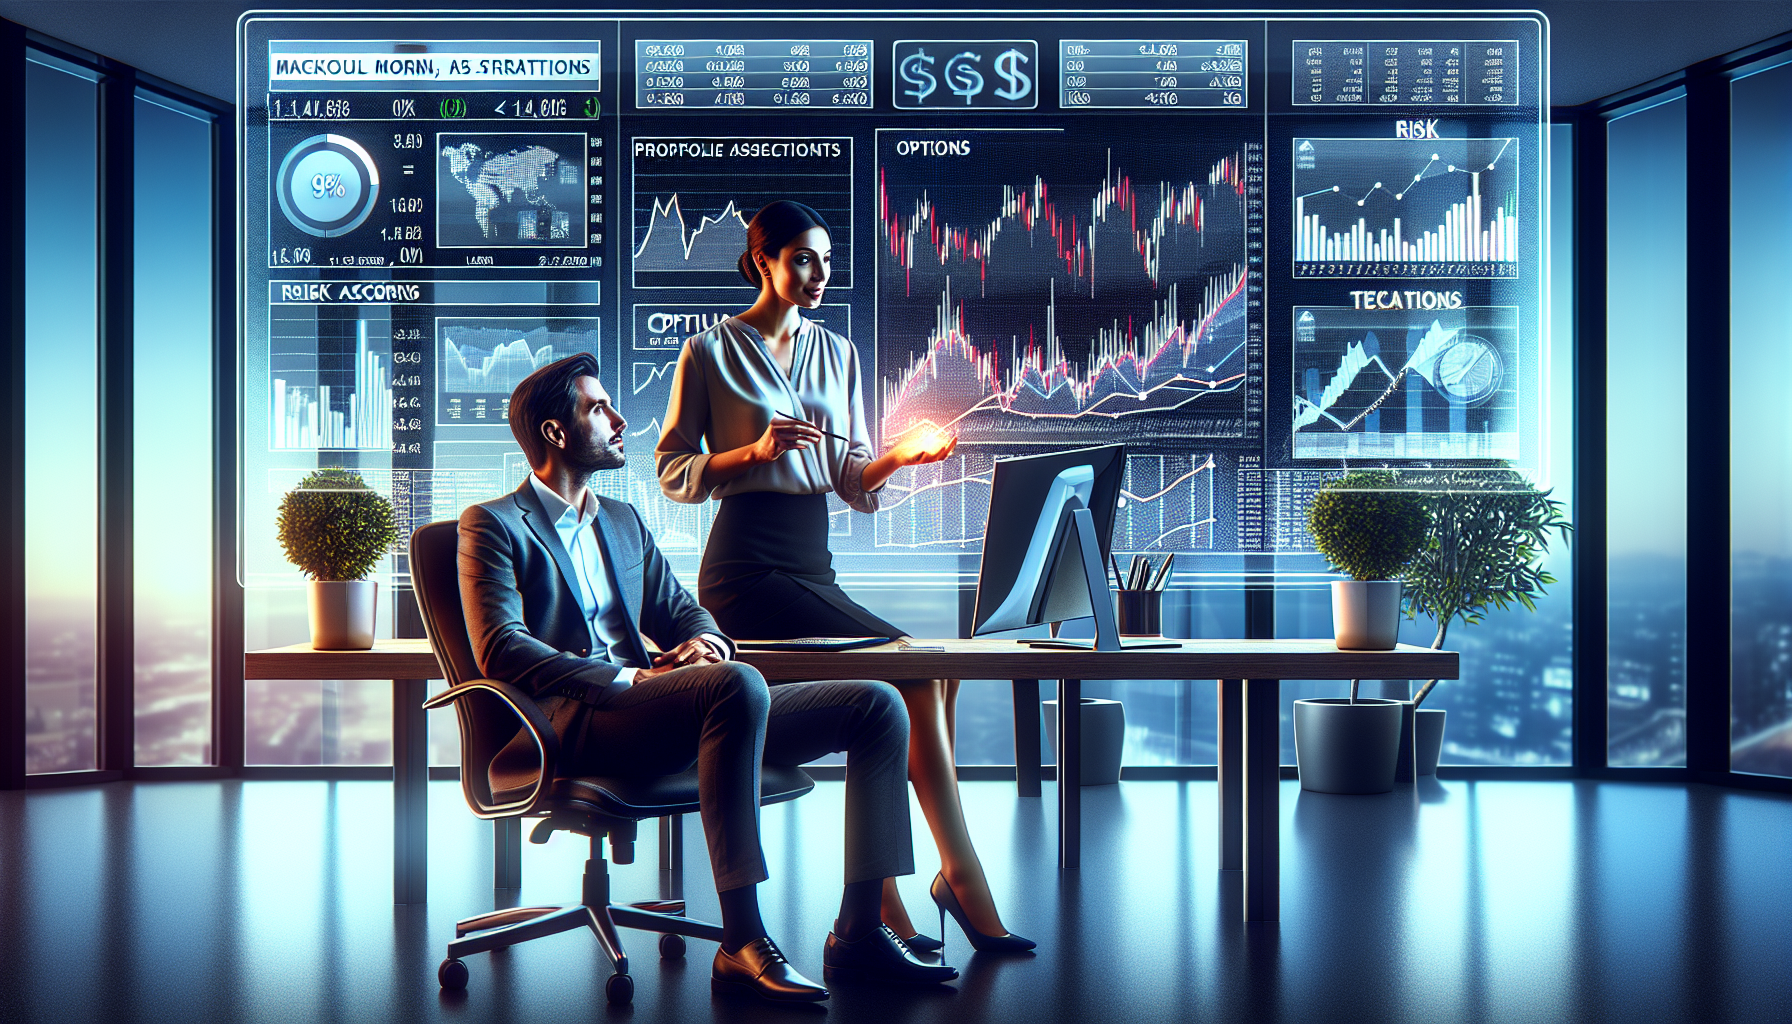 Create an image of a financial advisor and an investor discussing strategies for maximizing returns using a portfolio margin account. They are sitting at a modern office desk with a large screen displaying a diverse investment portfolio, including stocks, bonds, and options. The office has a sleek, professional look with charts and graphs on the walls indicating risk assessments and potential returns. The atmosphere should be vibrant and motivating, emphasizing growth and strategic planning.